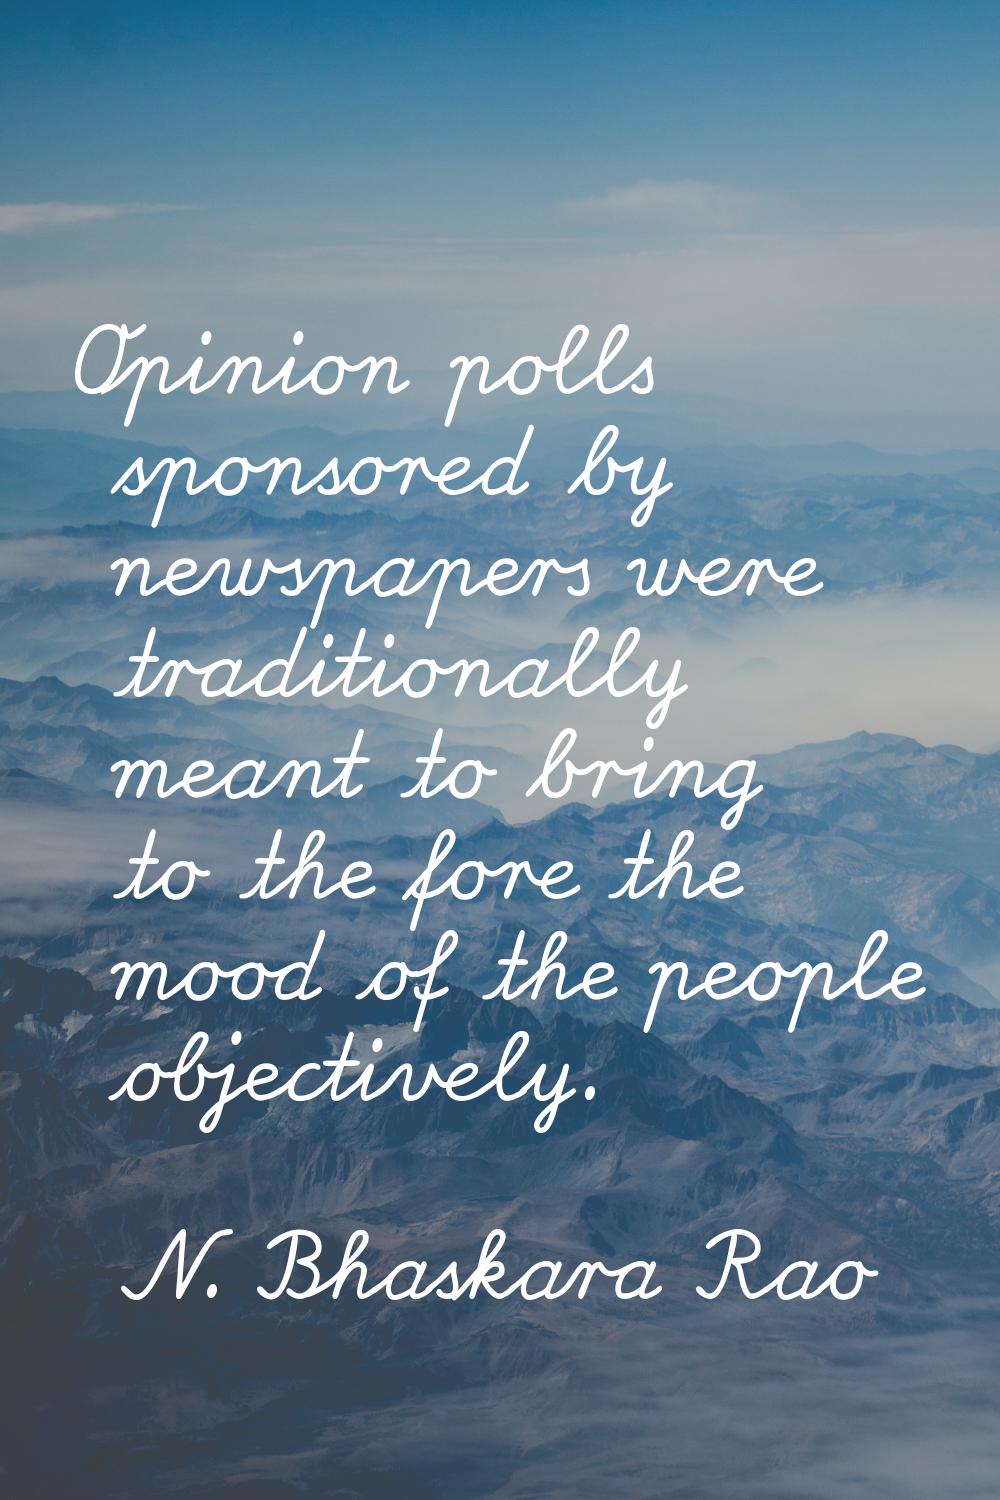 Opinion polls sponsored by newspapers were traditionally meant to bring to the fore the mood of the